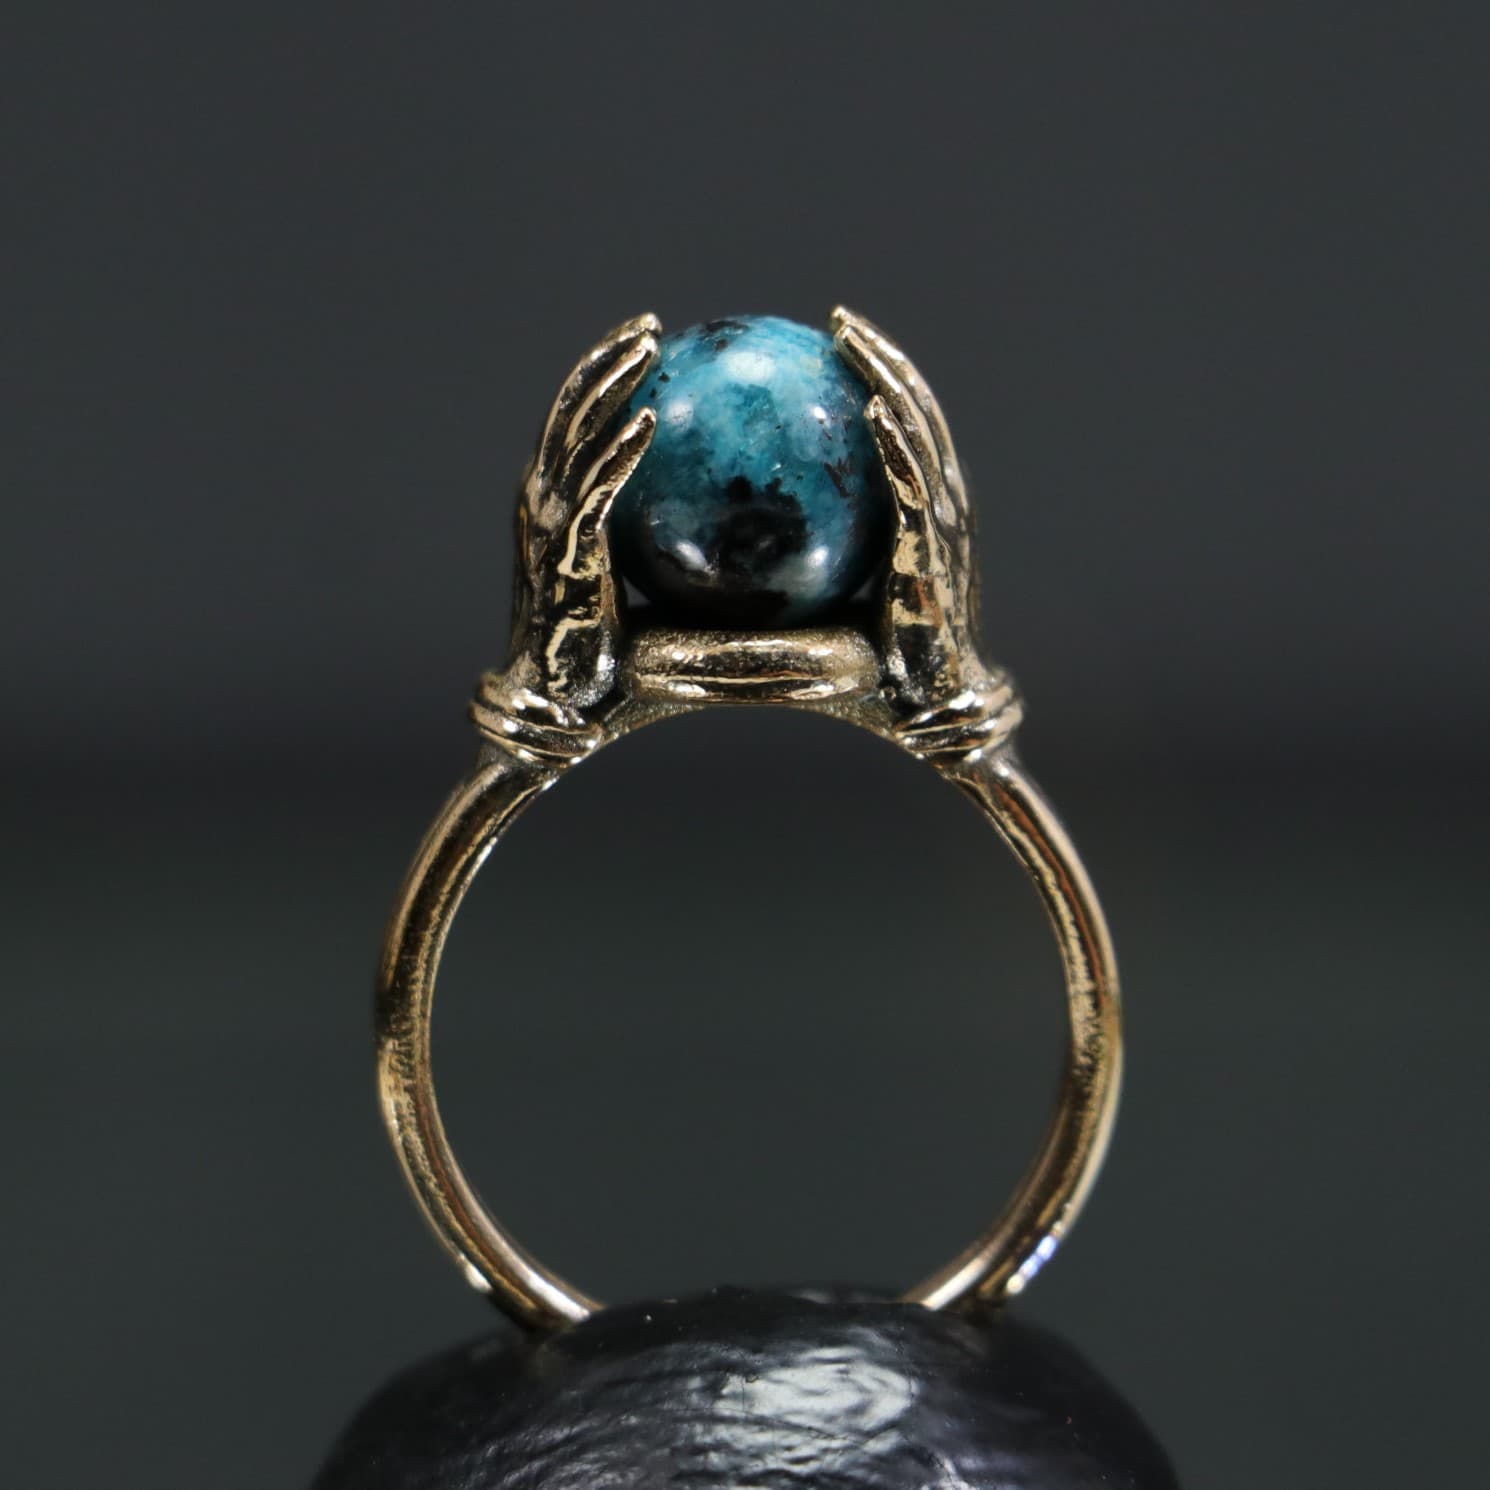 Turquoise Stone Ring Between Hands